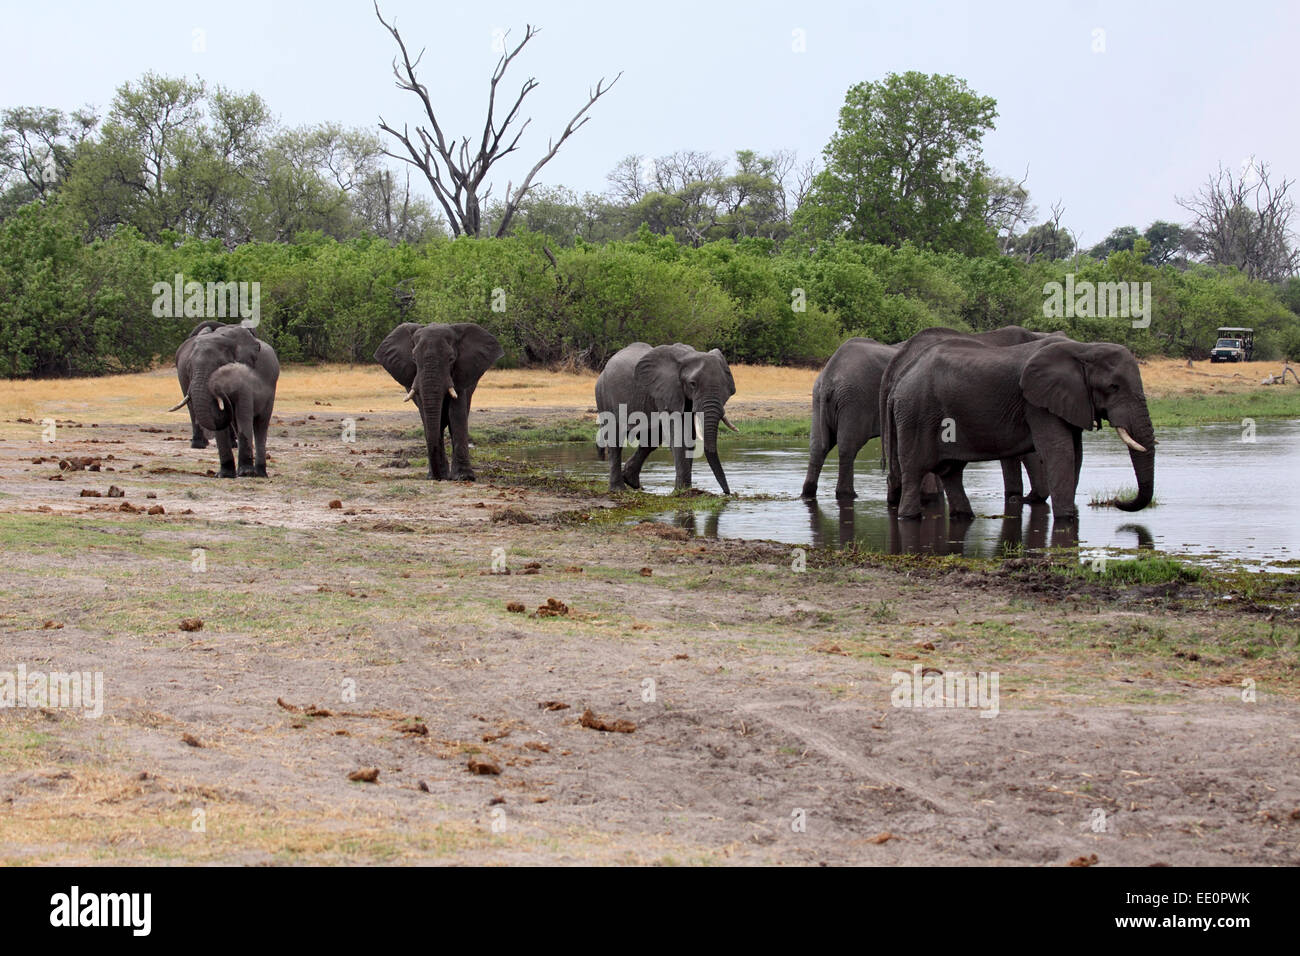 African elephant herd coming to drink at body of water in Okavango Delta Botswana Observed by safari vehicle in the background Stock Photo